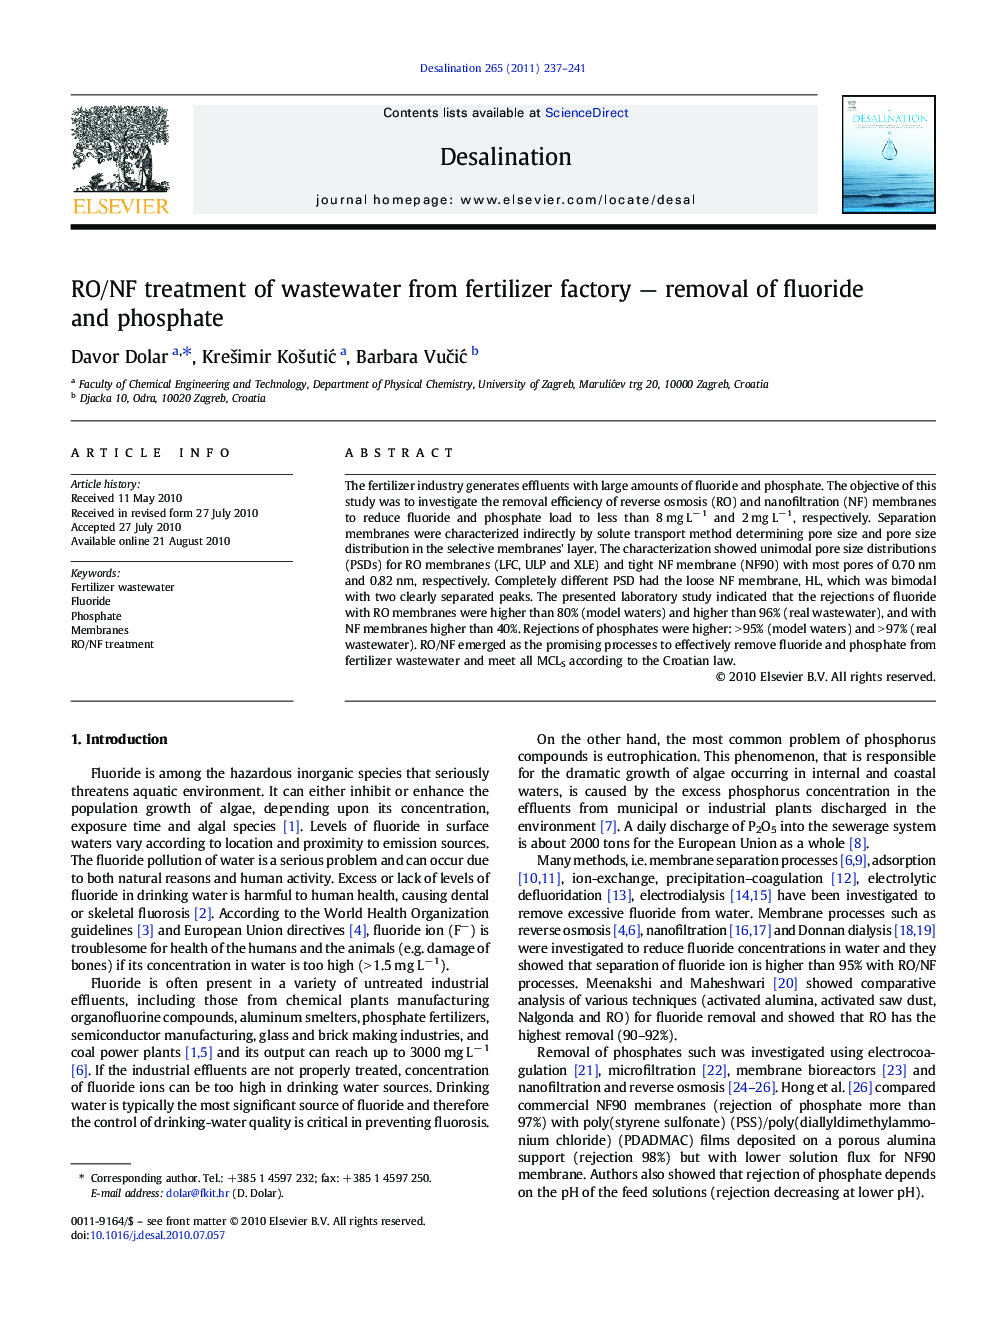 RO/NF treatment of wastewater from fertilizer factory — removal of fluoride and phosphate